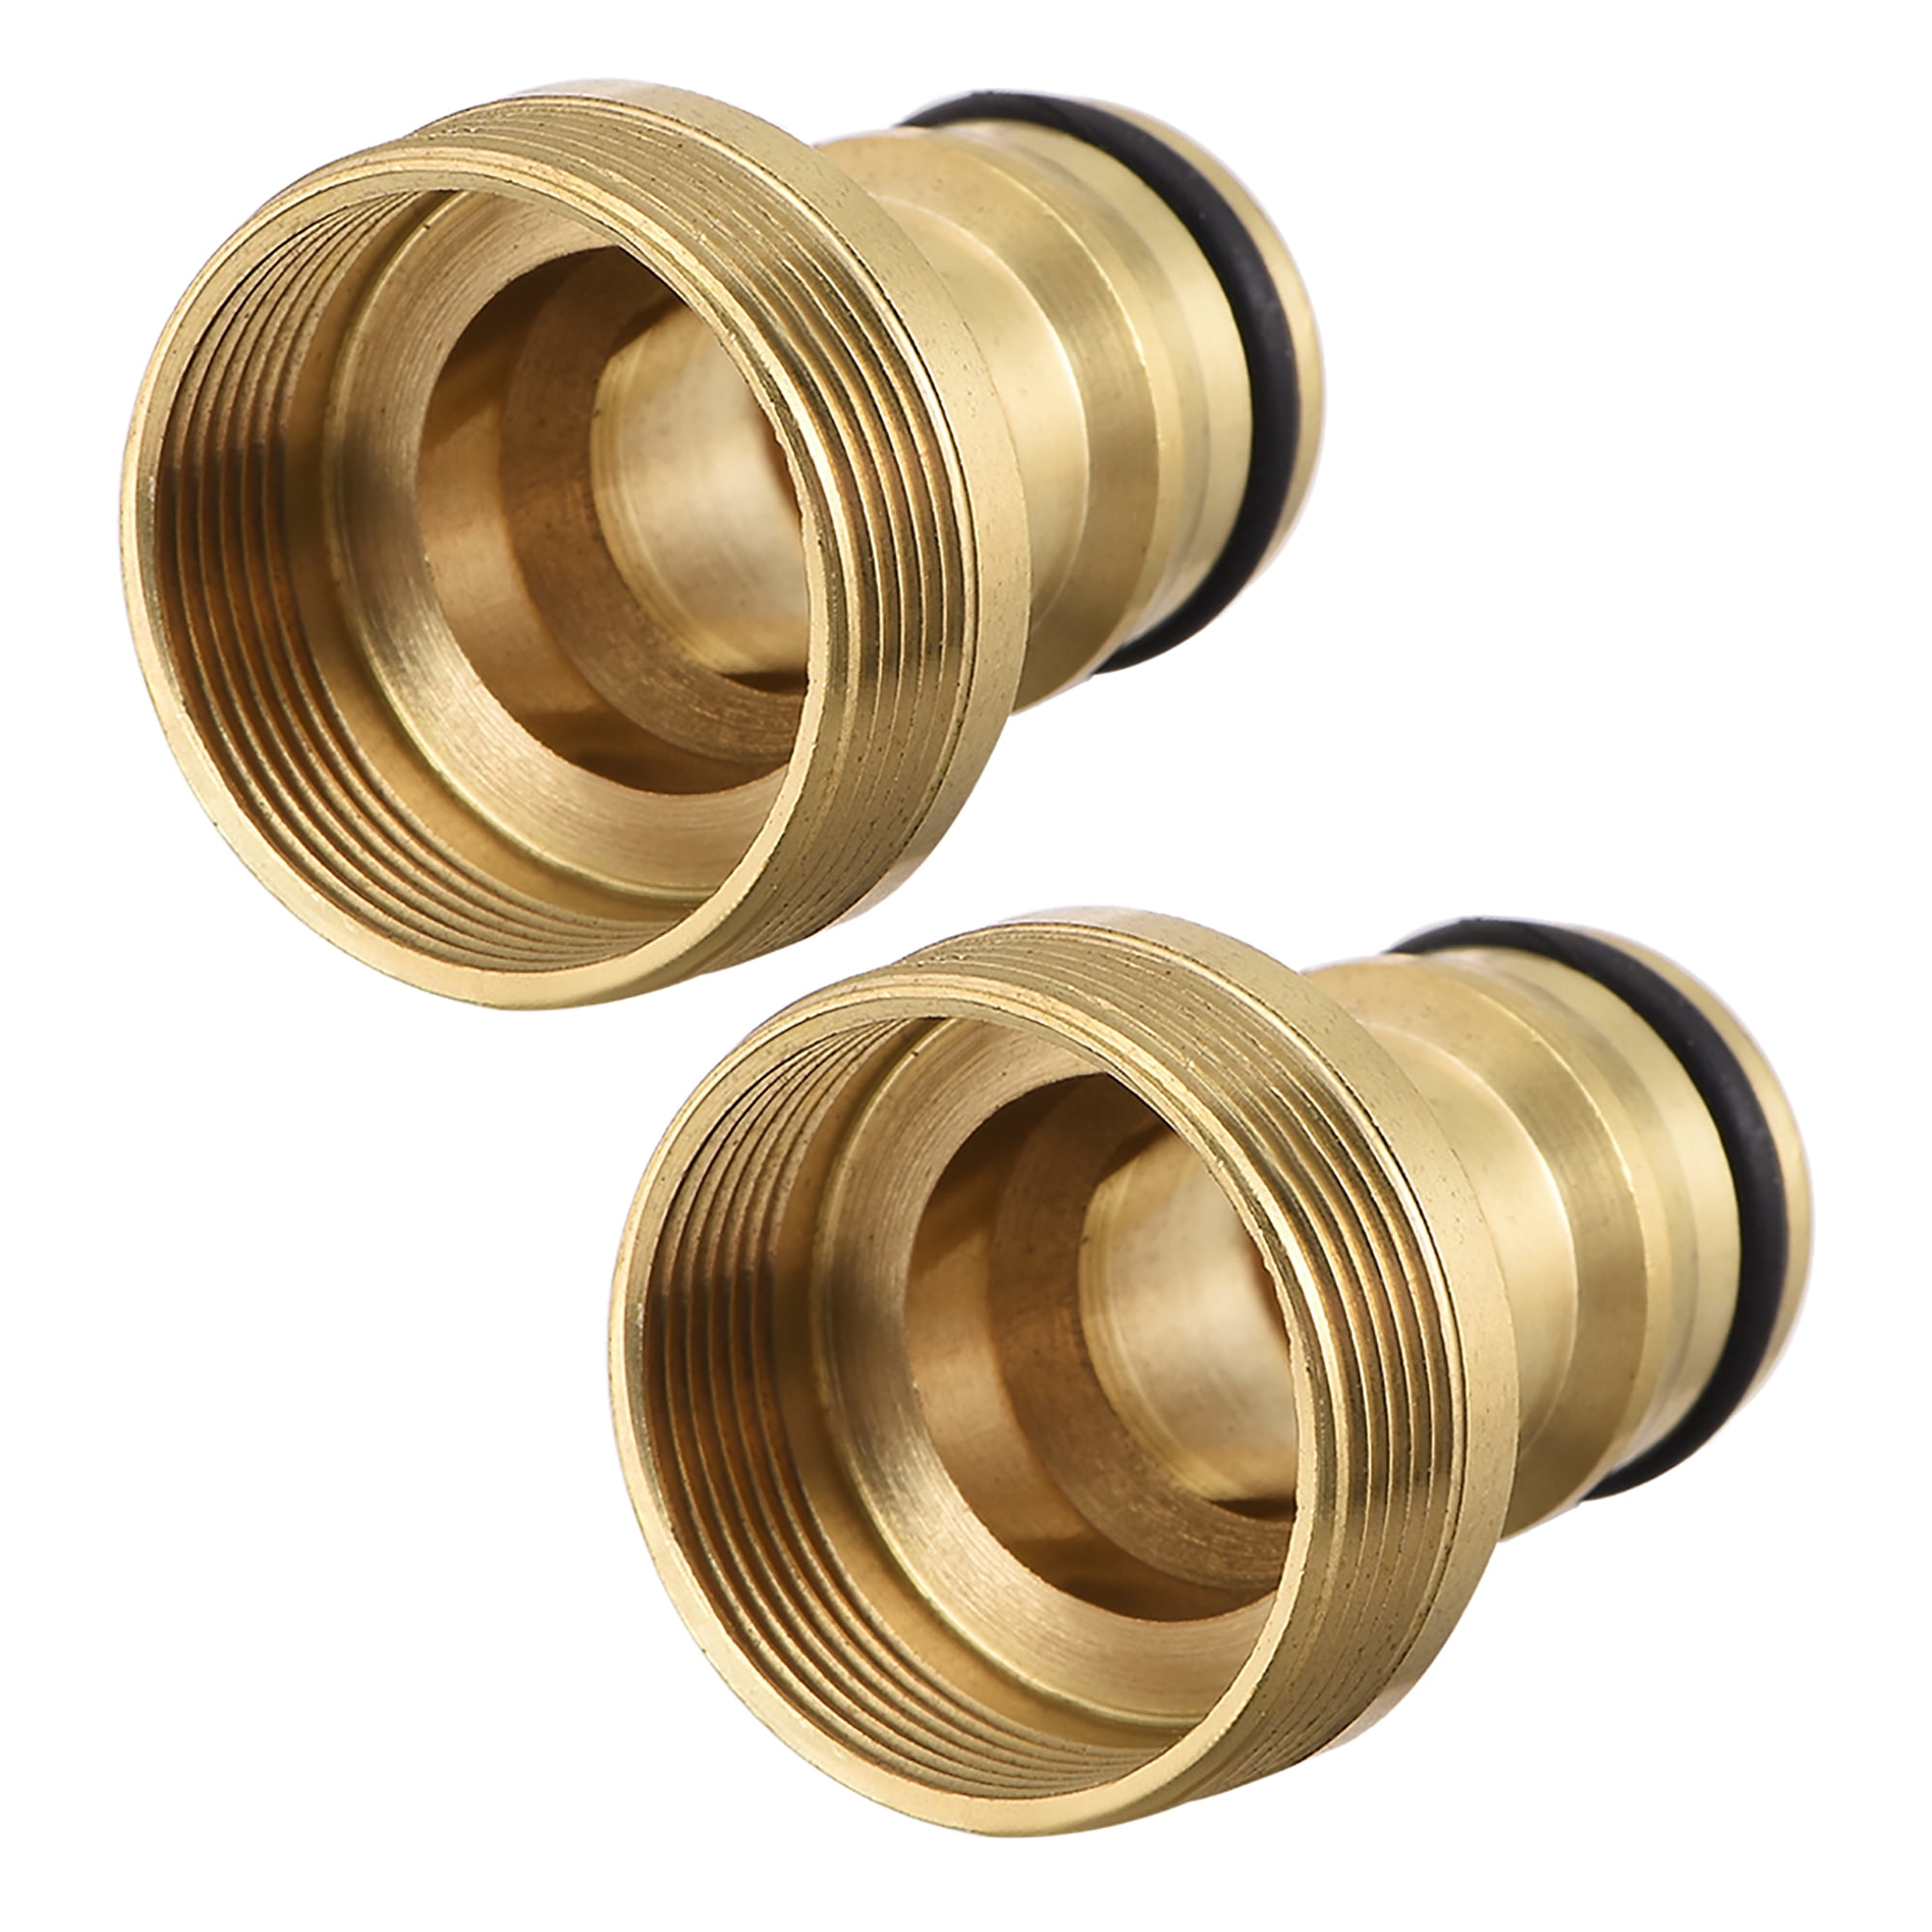 Brass Garden Hose Quick Connector Nozzle Pipe Adapter 20mm Dia Female 2pcs 